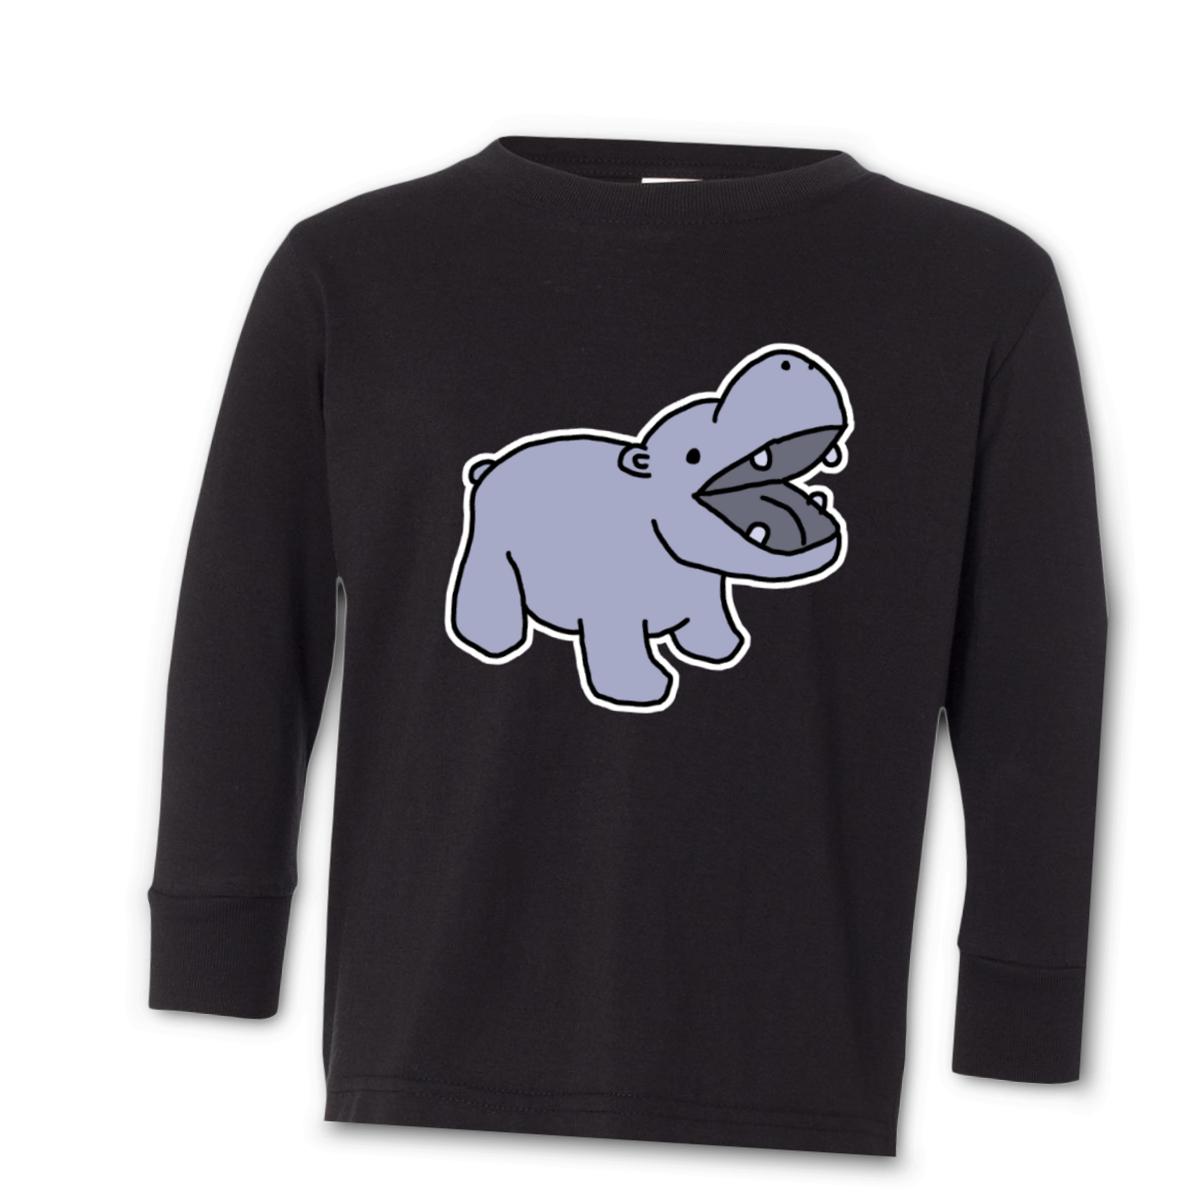 Toy Hippo Toddler Long Sleeve Tee 4T black